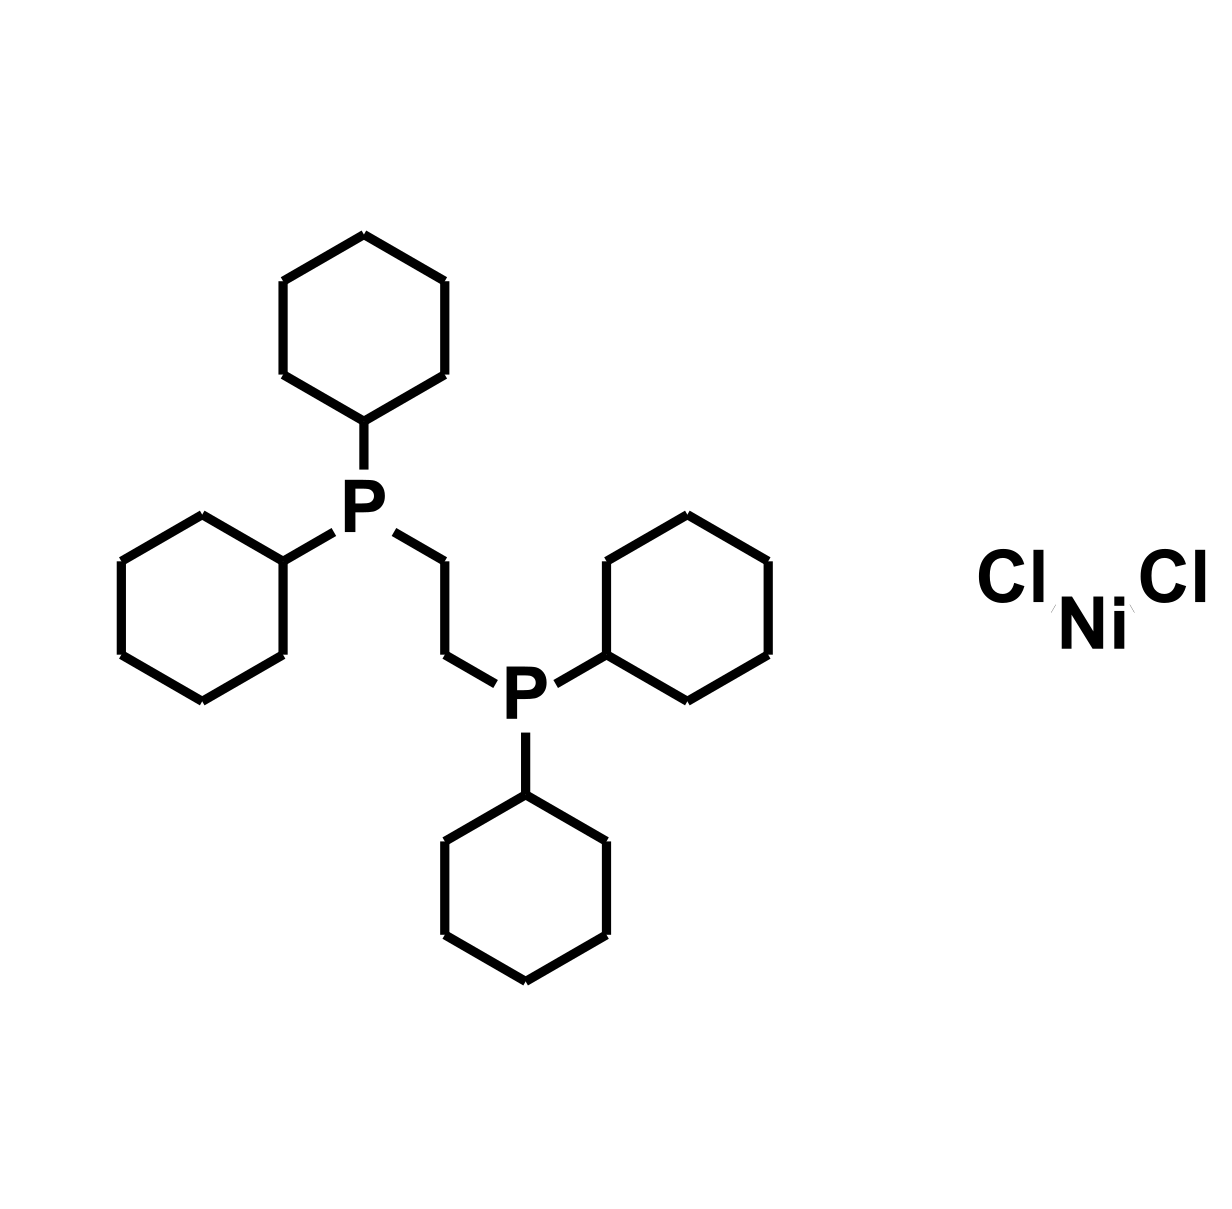 (1,2-Bis(dicyclohexylphosphino)ethane)dichloronickel(II) Chemical Structure